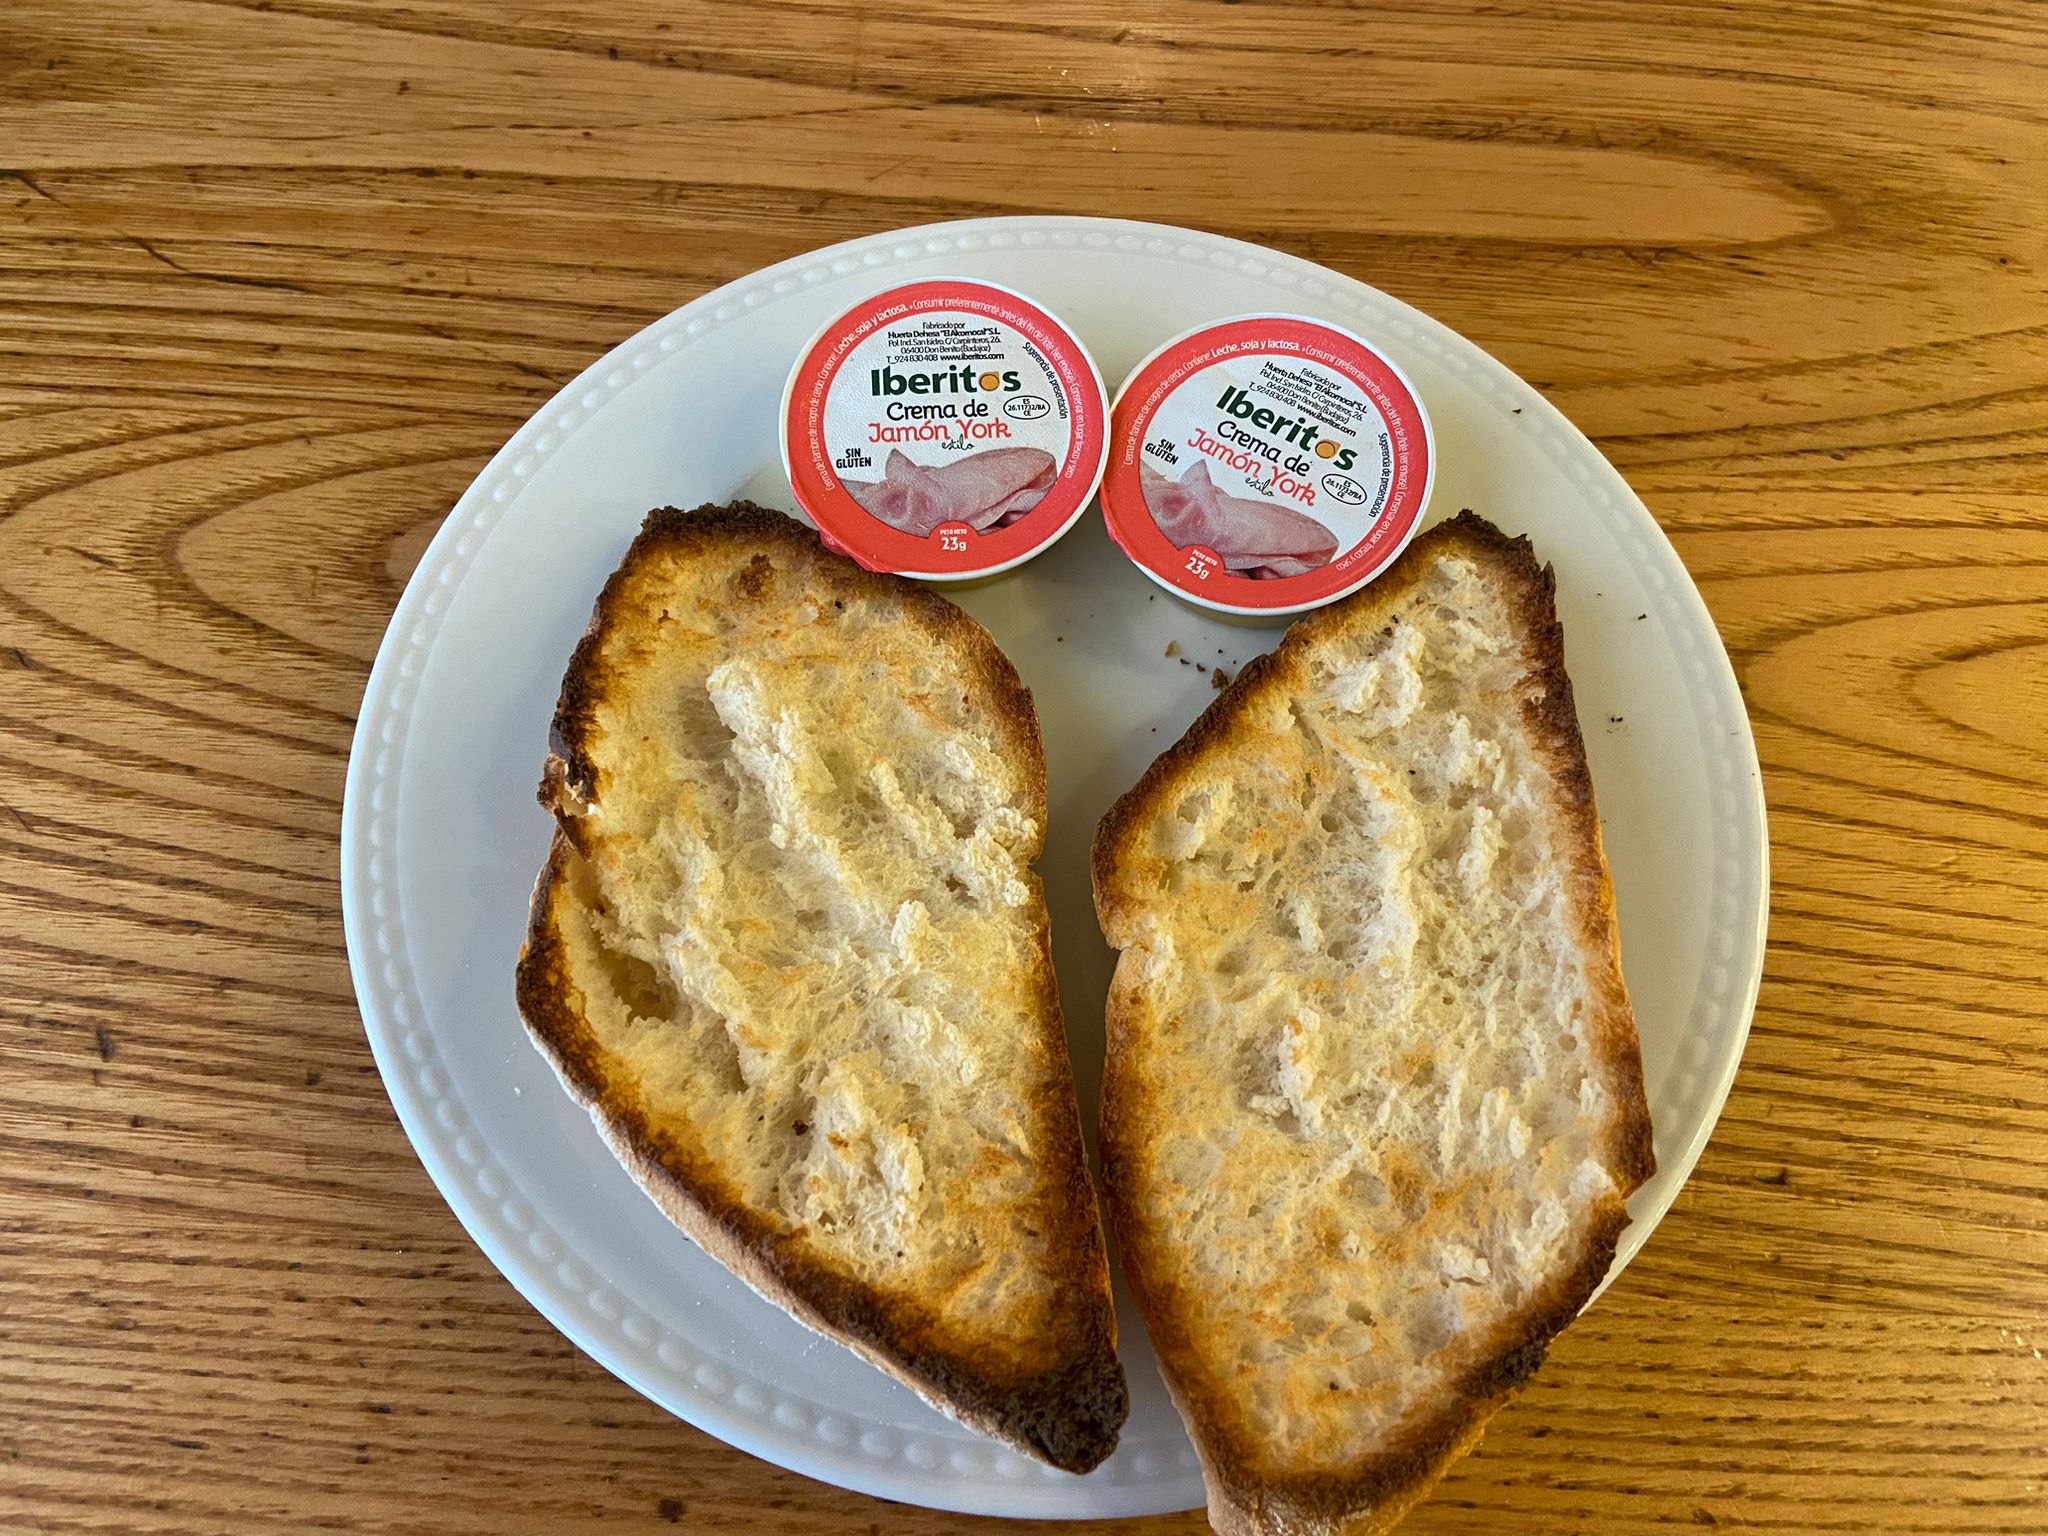 Toasted bread with york cream